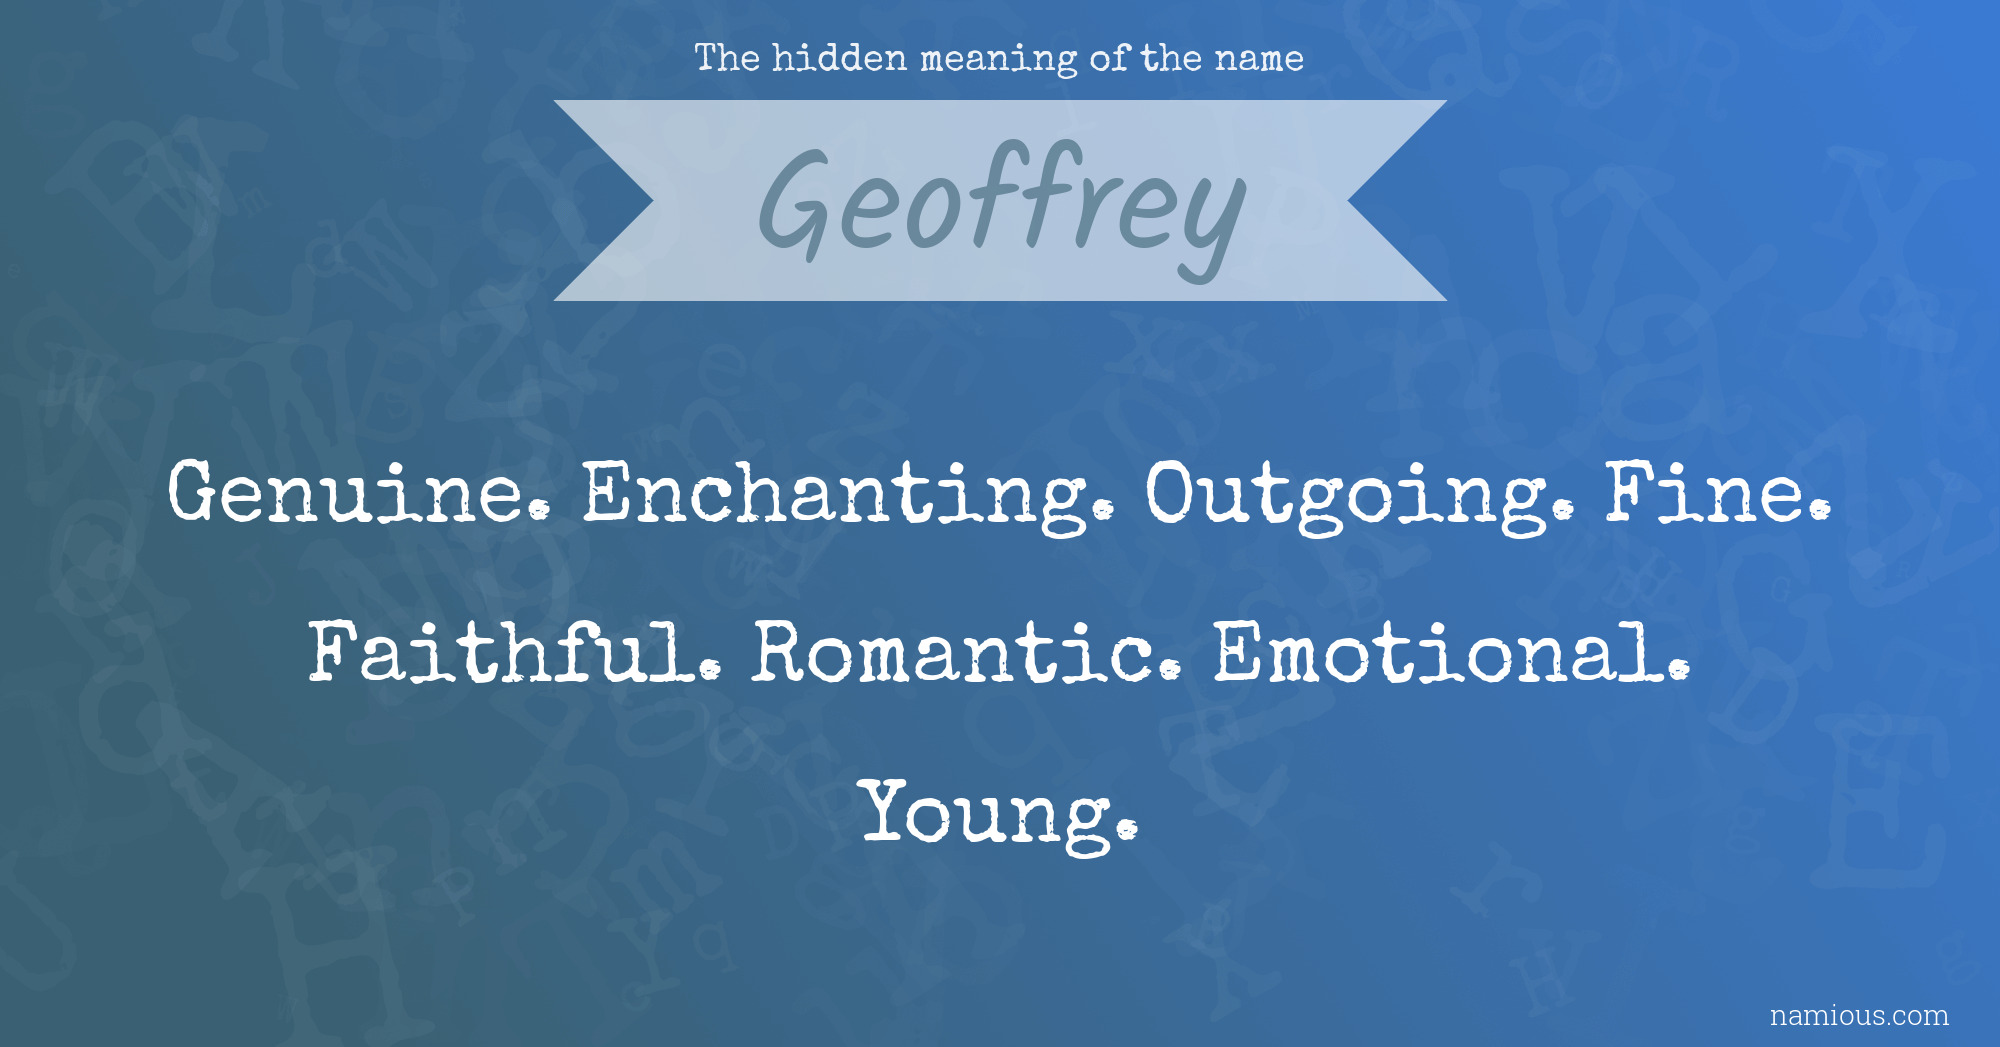 The hidden meaning of the name Geoffrey